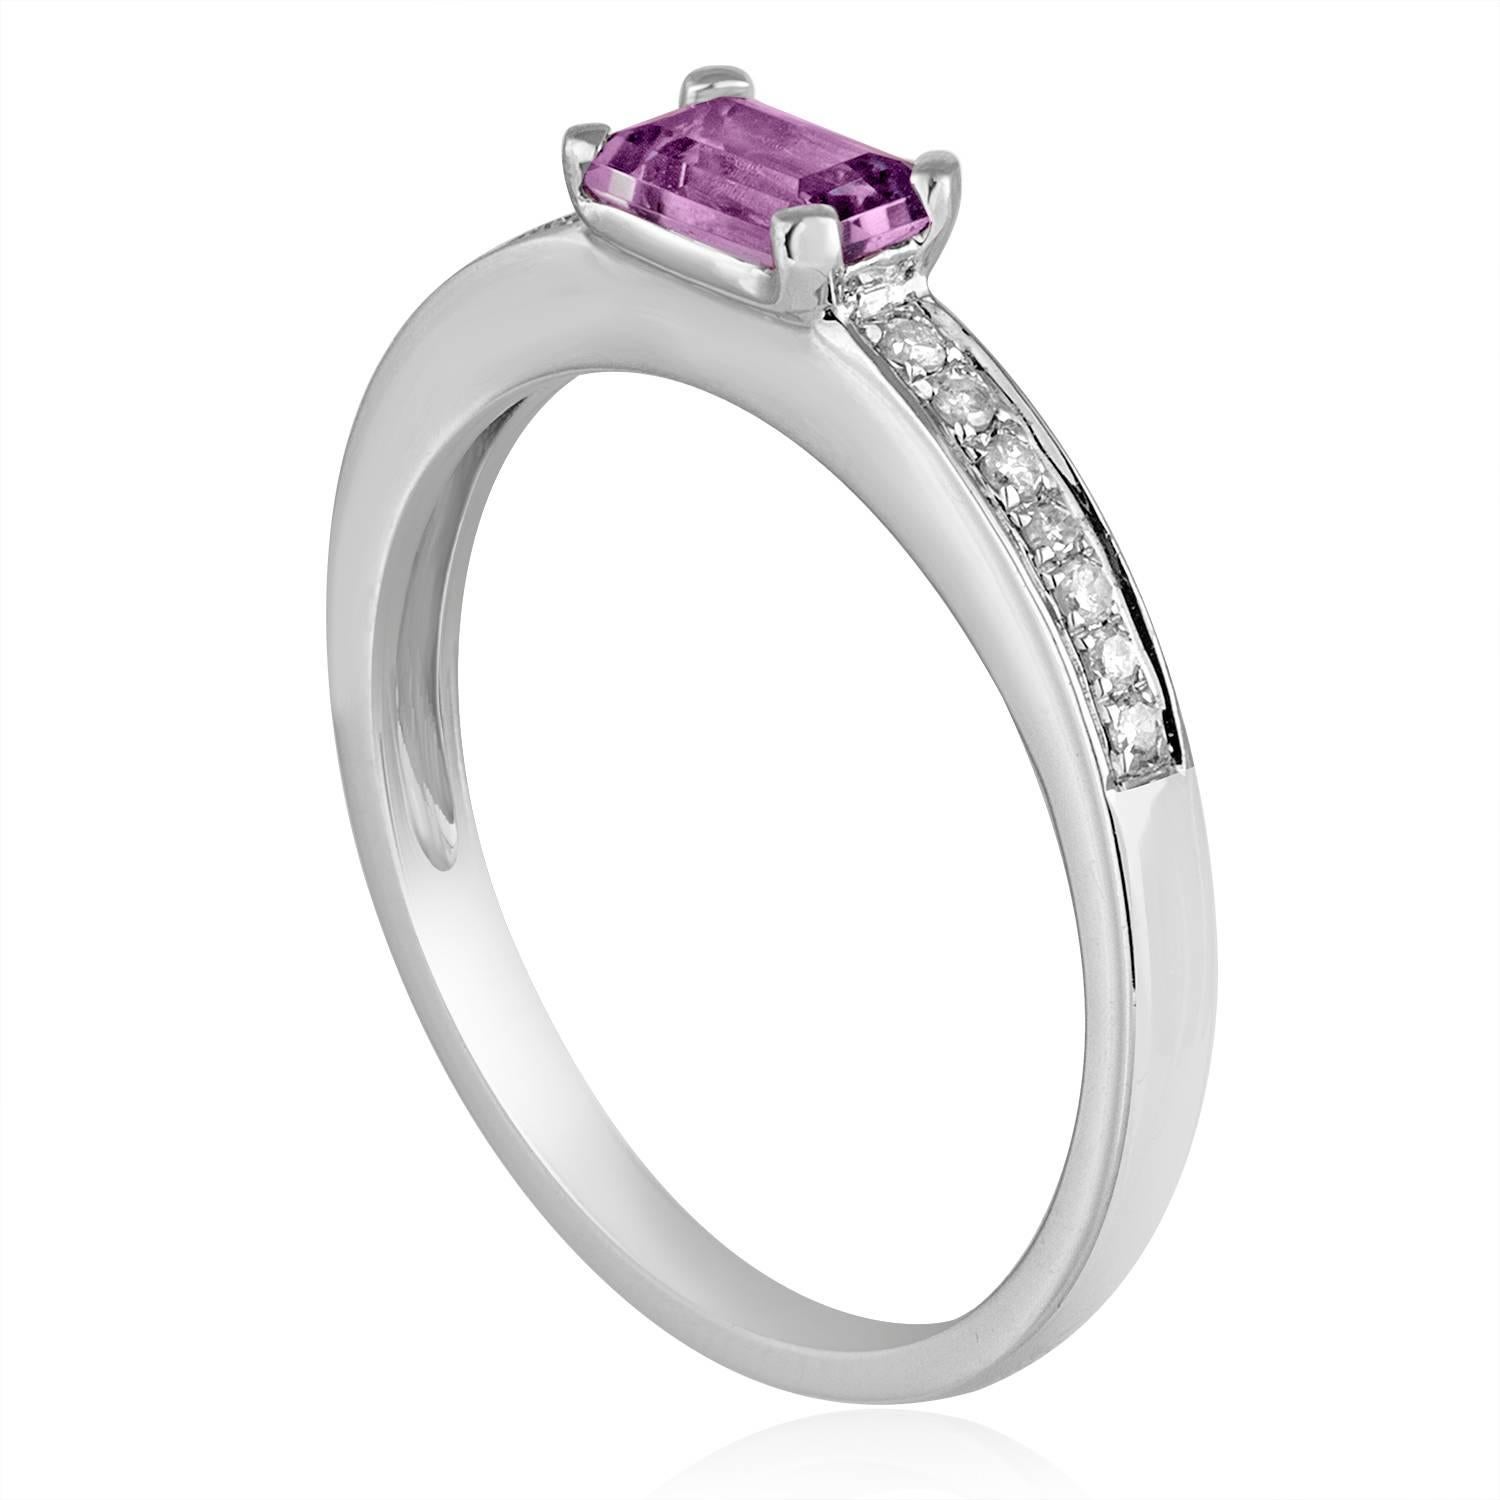 Stackable Amethyst Baguette Ring
The ring is 14K White Gold
There are 0.08 Carats In Diamonds H SI
The Center Stone is an Amethyst Baguette 0.37 Carats
The top measures 1/4